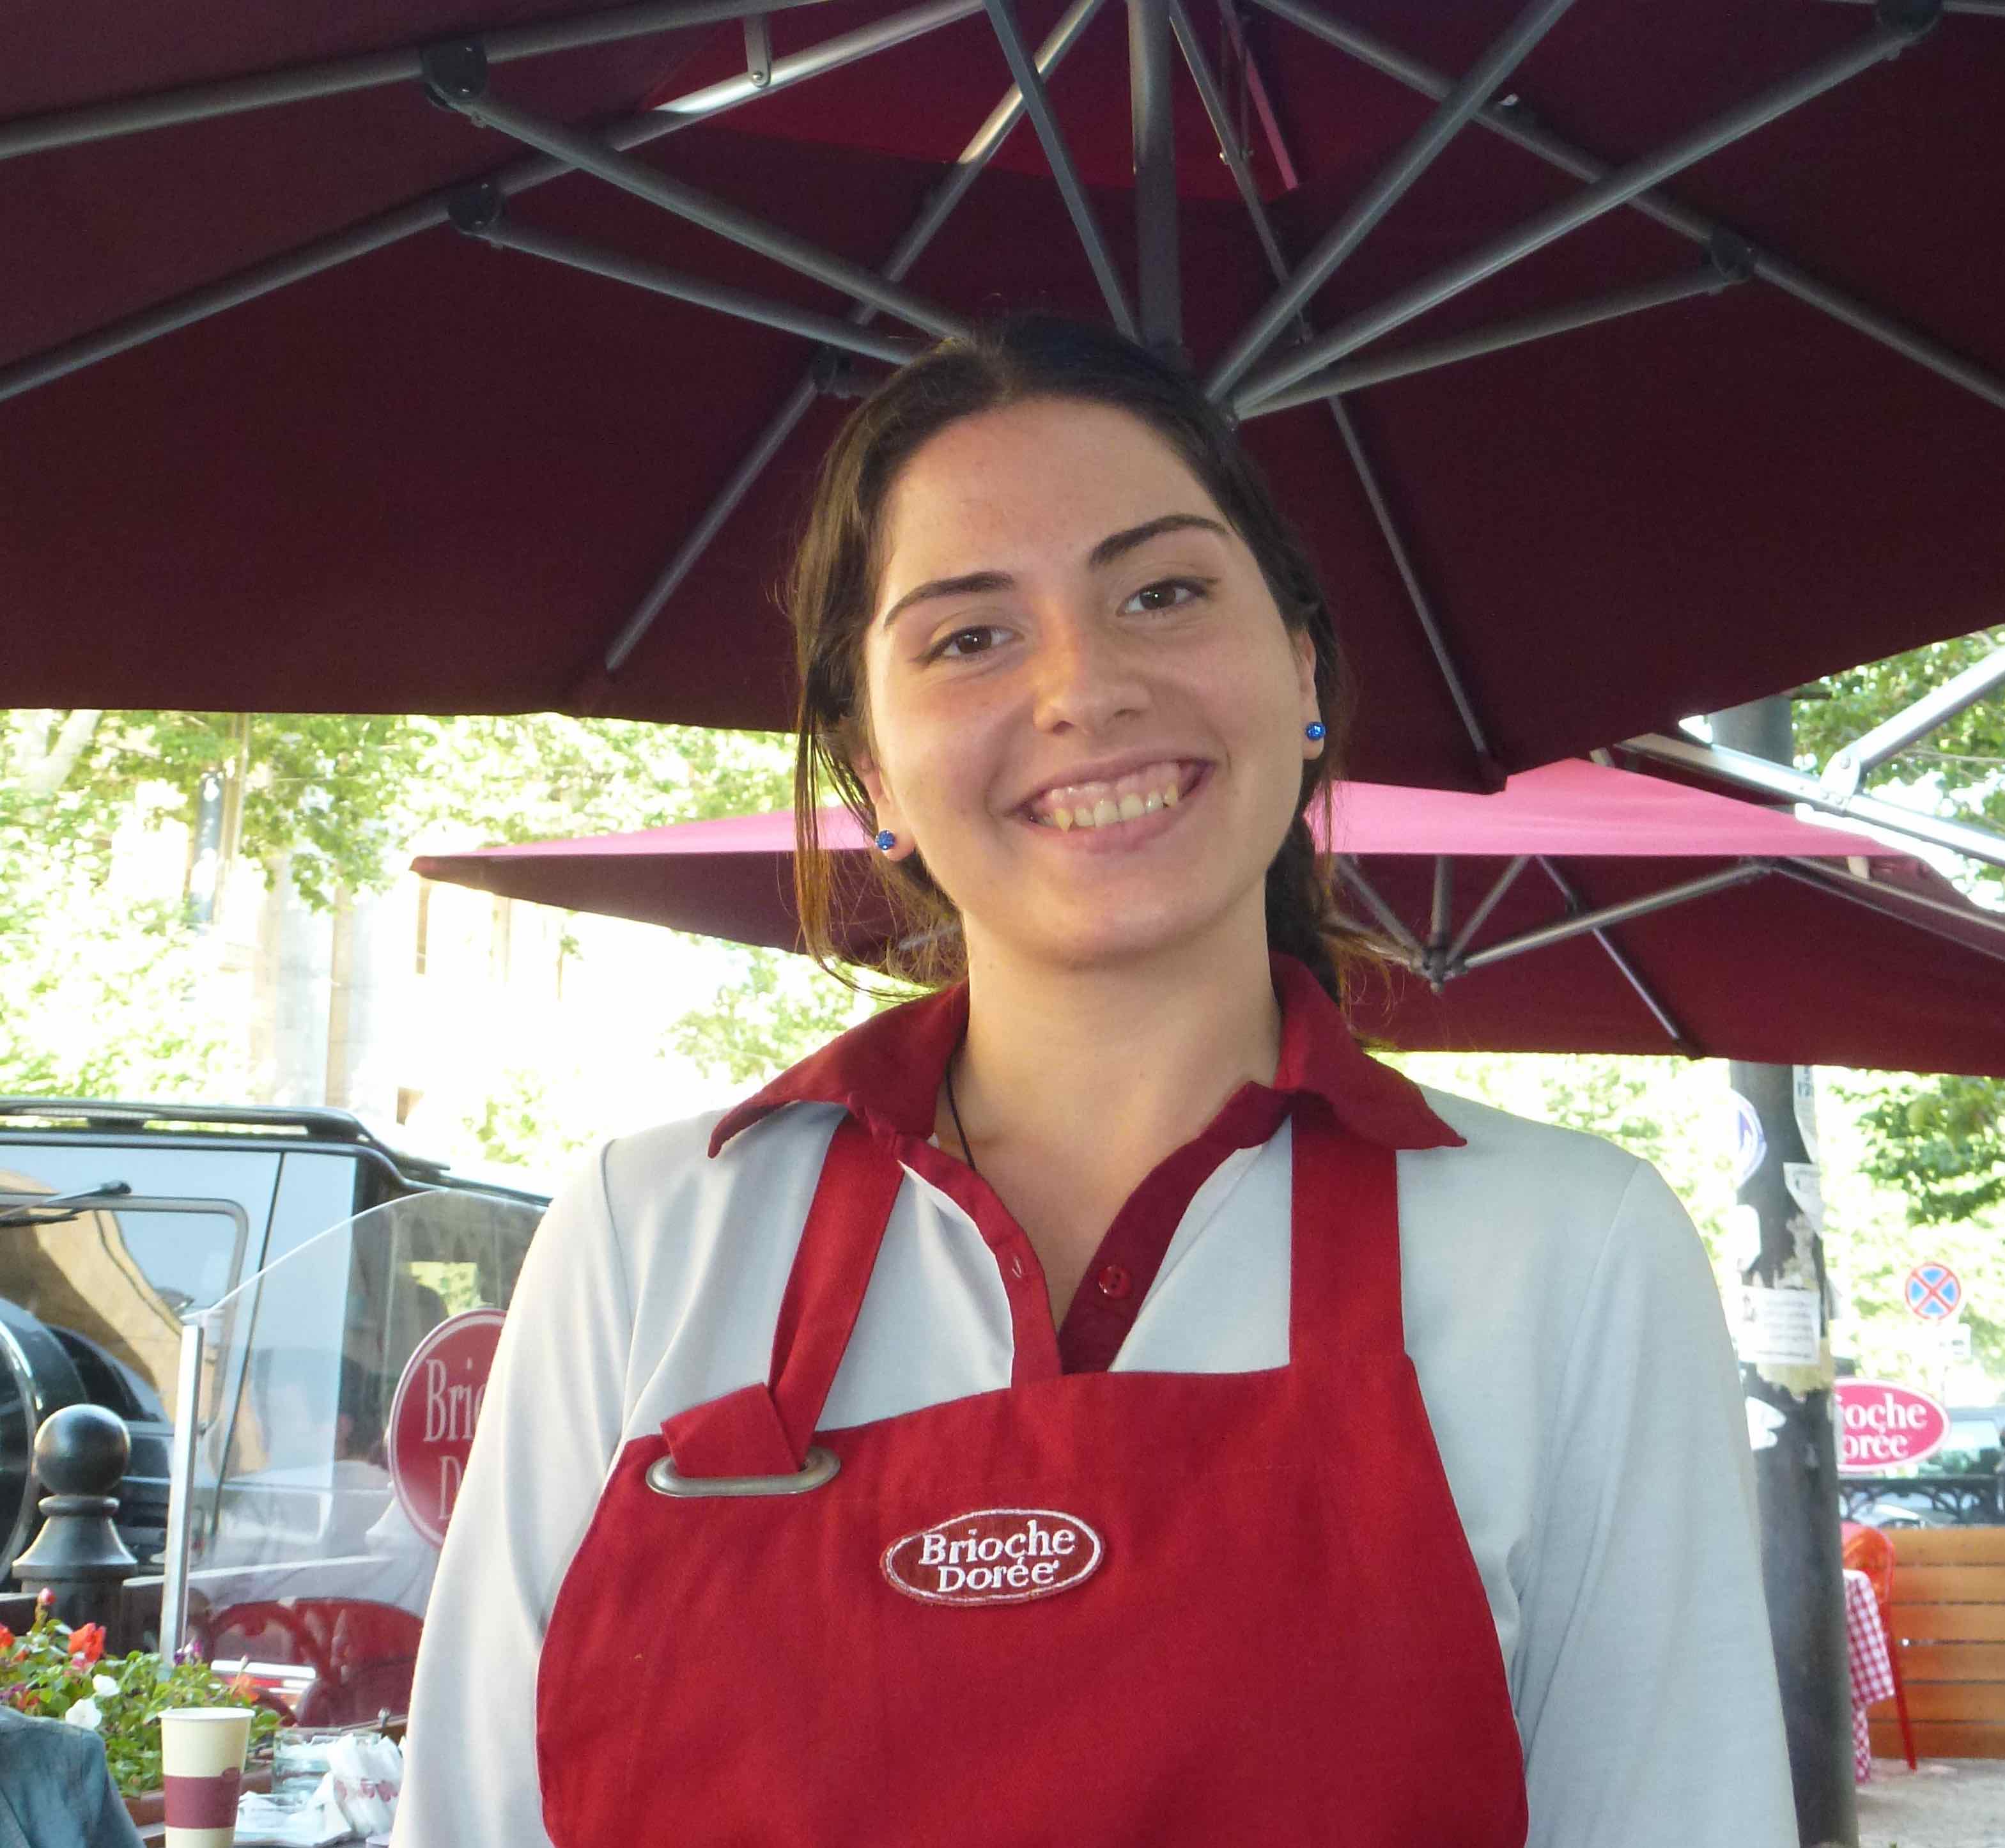 Image of waitress at outdoor cafe